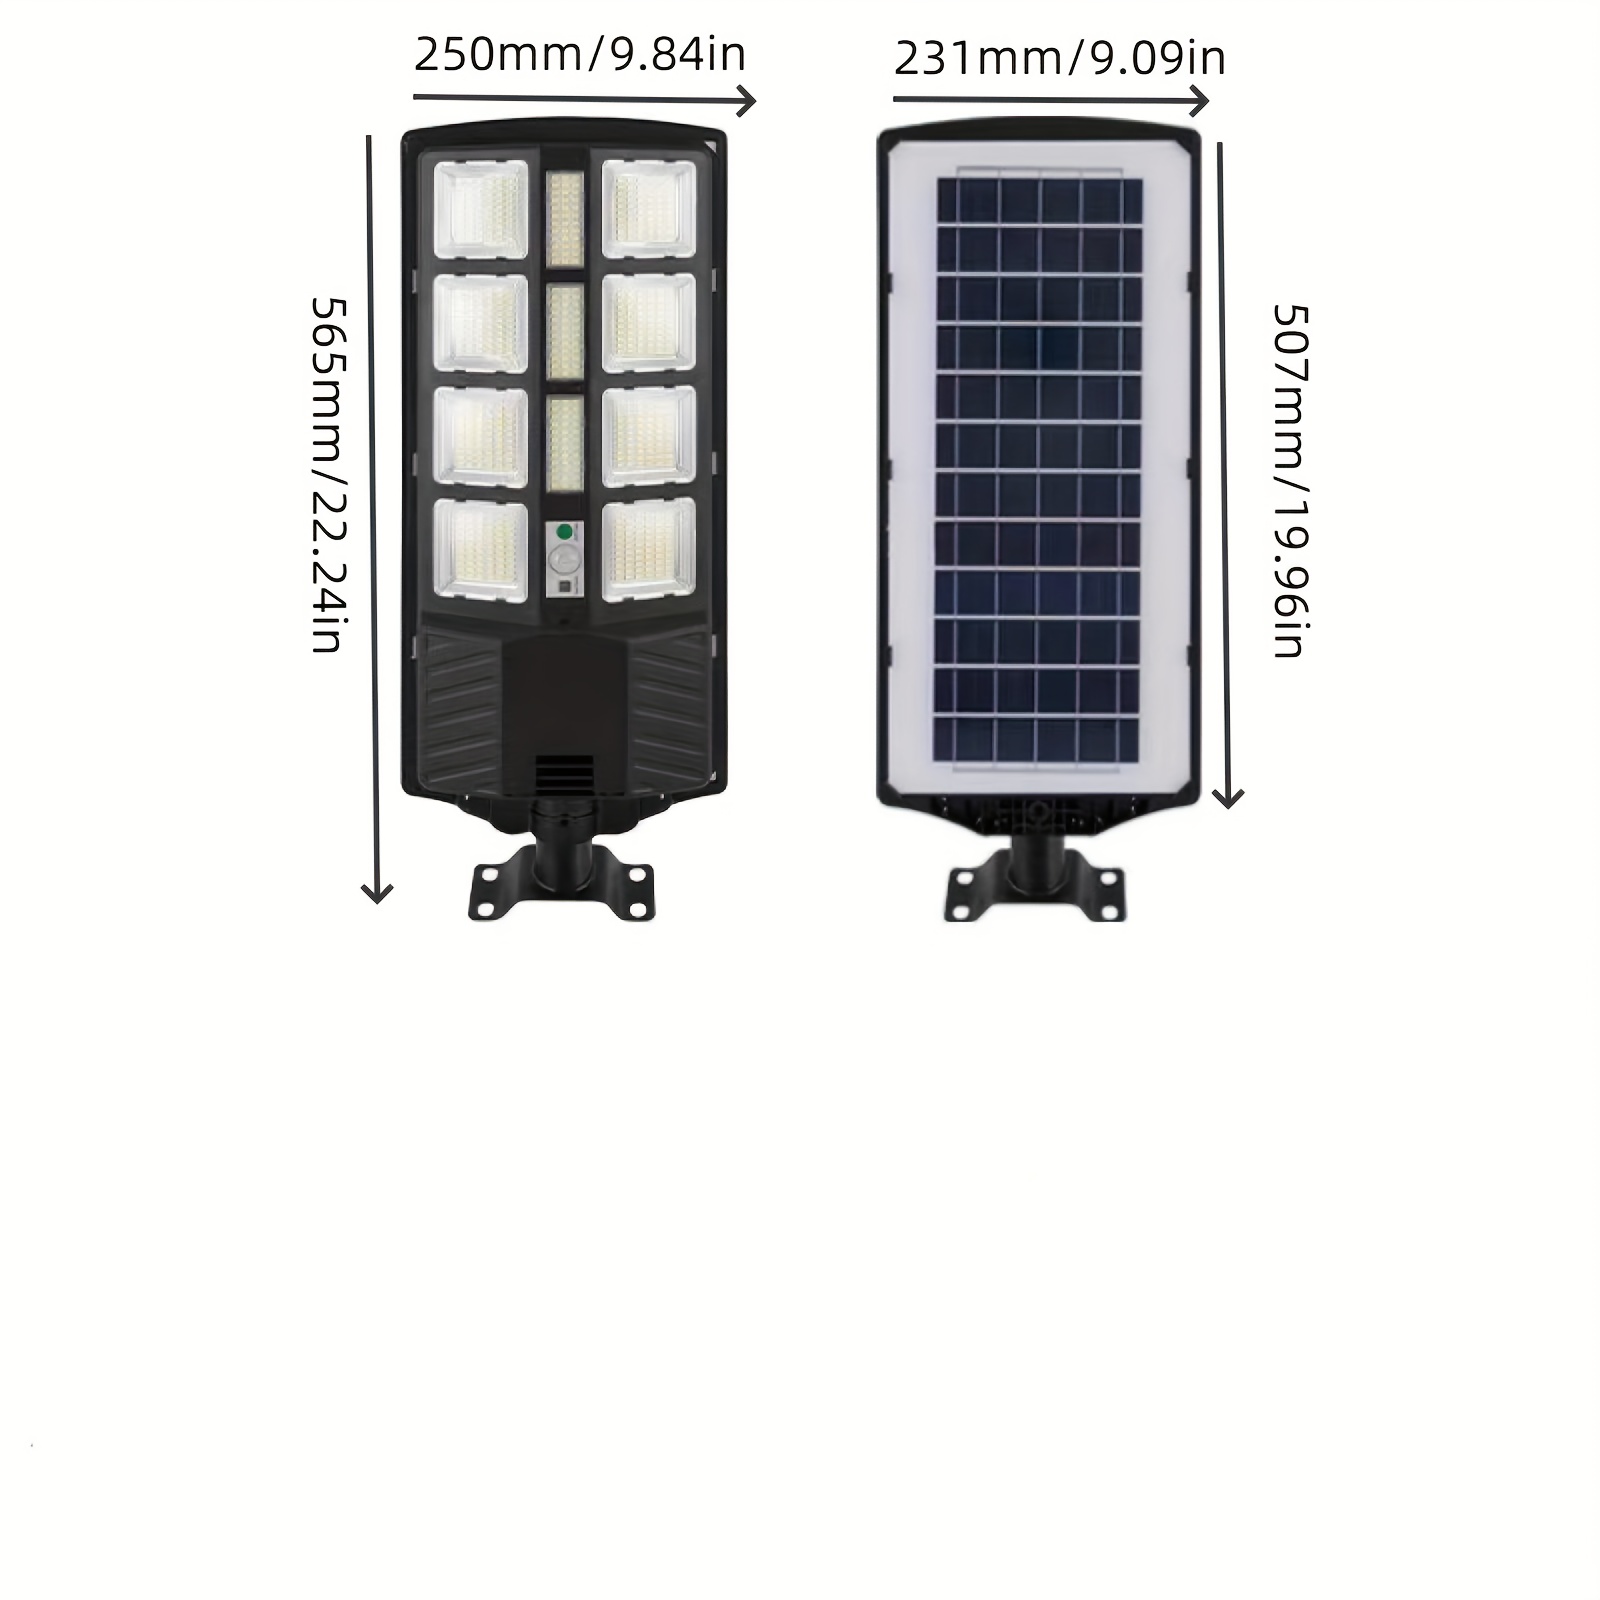 1pc 300w integrated human body sensing and intelligent light controlled solar light suitable for courtyards farms roads and front doors free shrink rod remote control wall installation package details 7